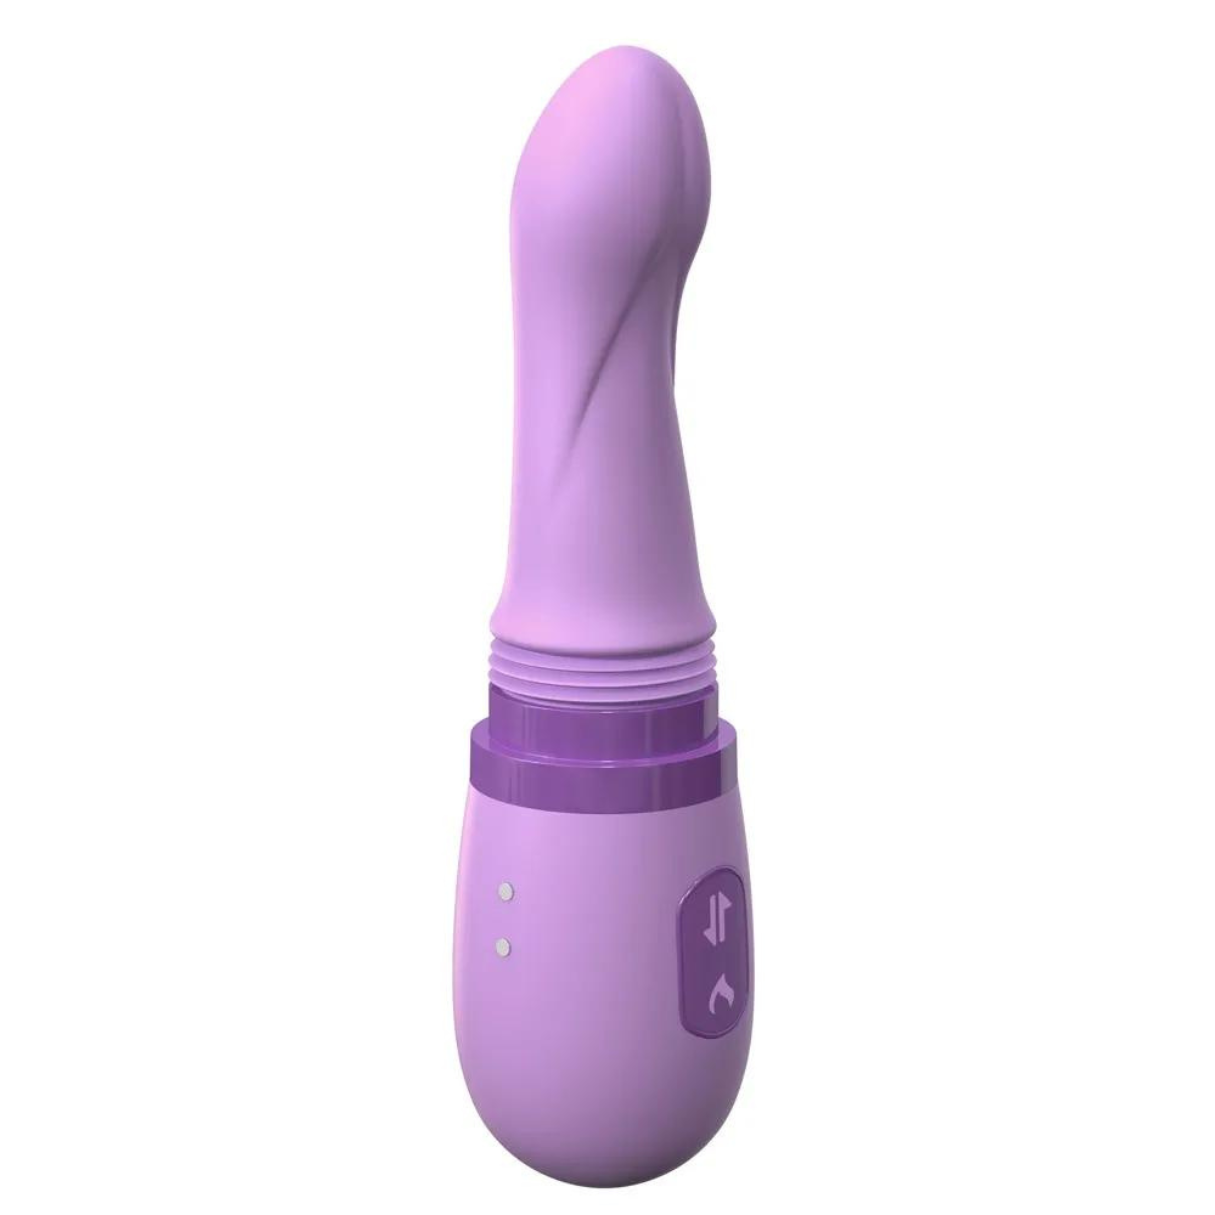 FANTASY FOR Vibrator Machine Her Sex Personal HER